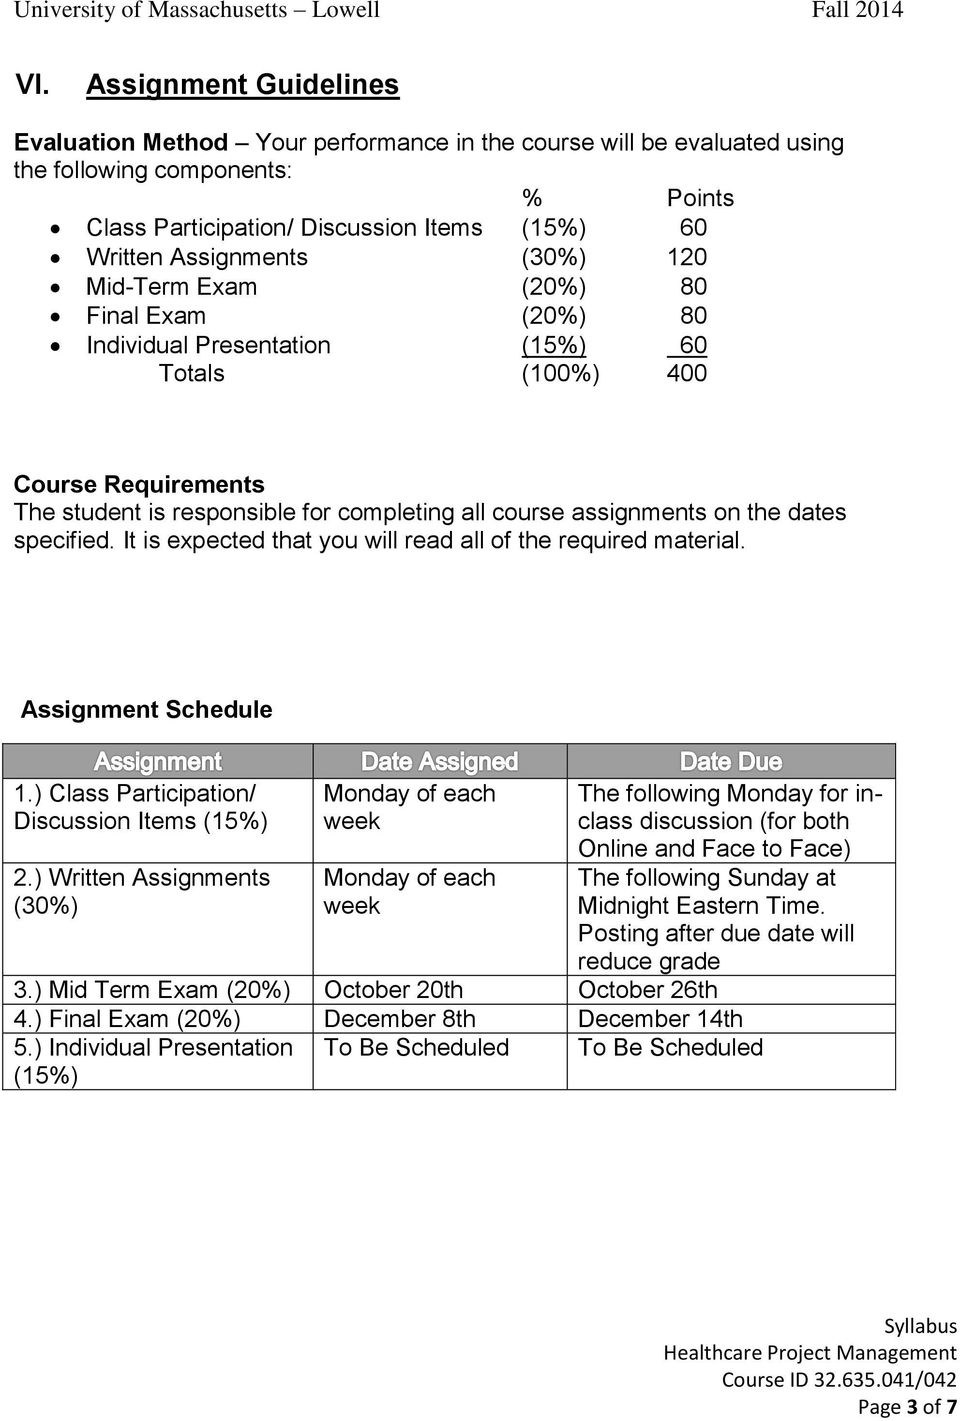 assignments on the dates specified. It is expected that you will read all of the required material. Assignment Schedule 1.) Class Participation/ Discussion Items (15%) 2.